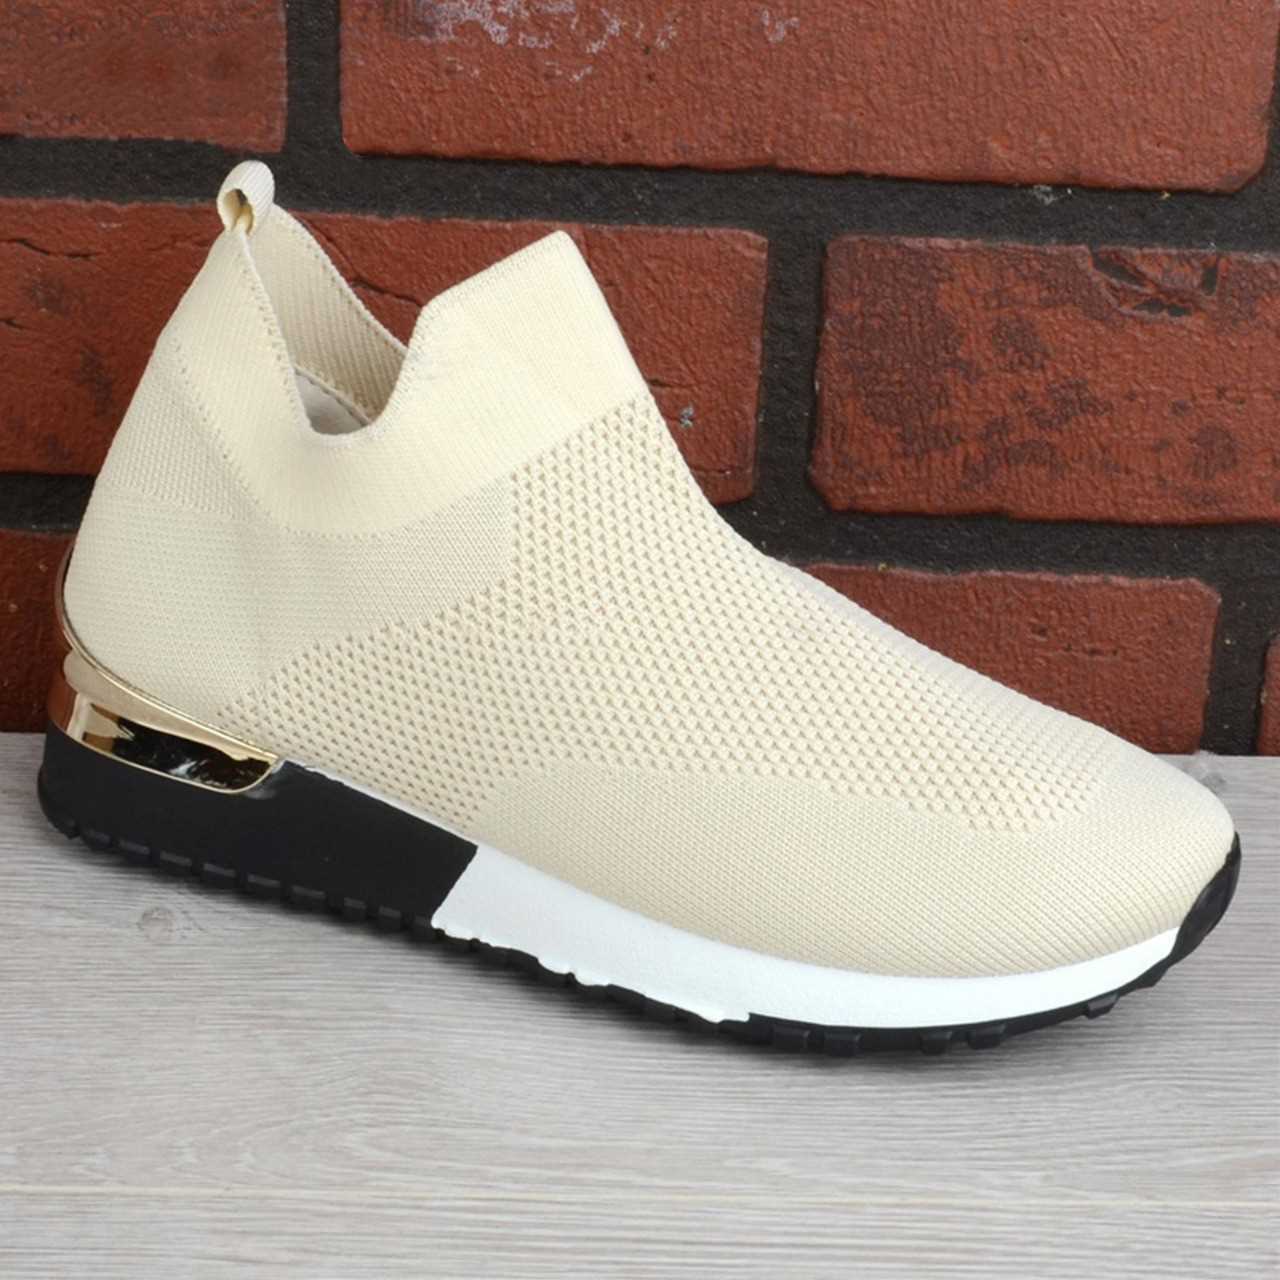 UK Size 5 EUR Size 38 Cream Khaki Ladies Womens Slip on Sock Wedge Sneakers Classic Jogging Pumps Shoes Trainers